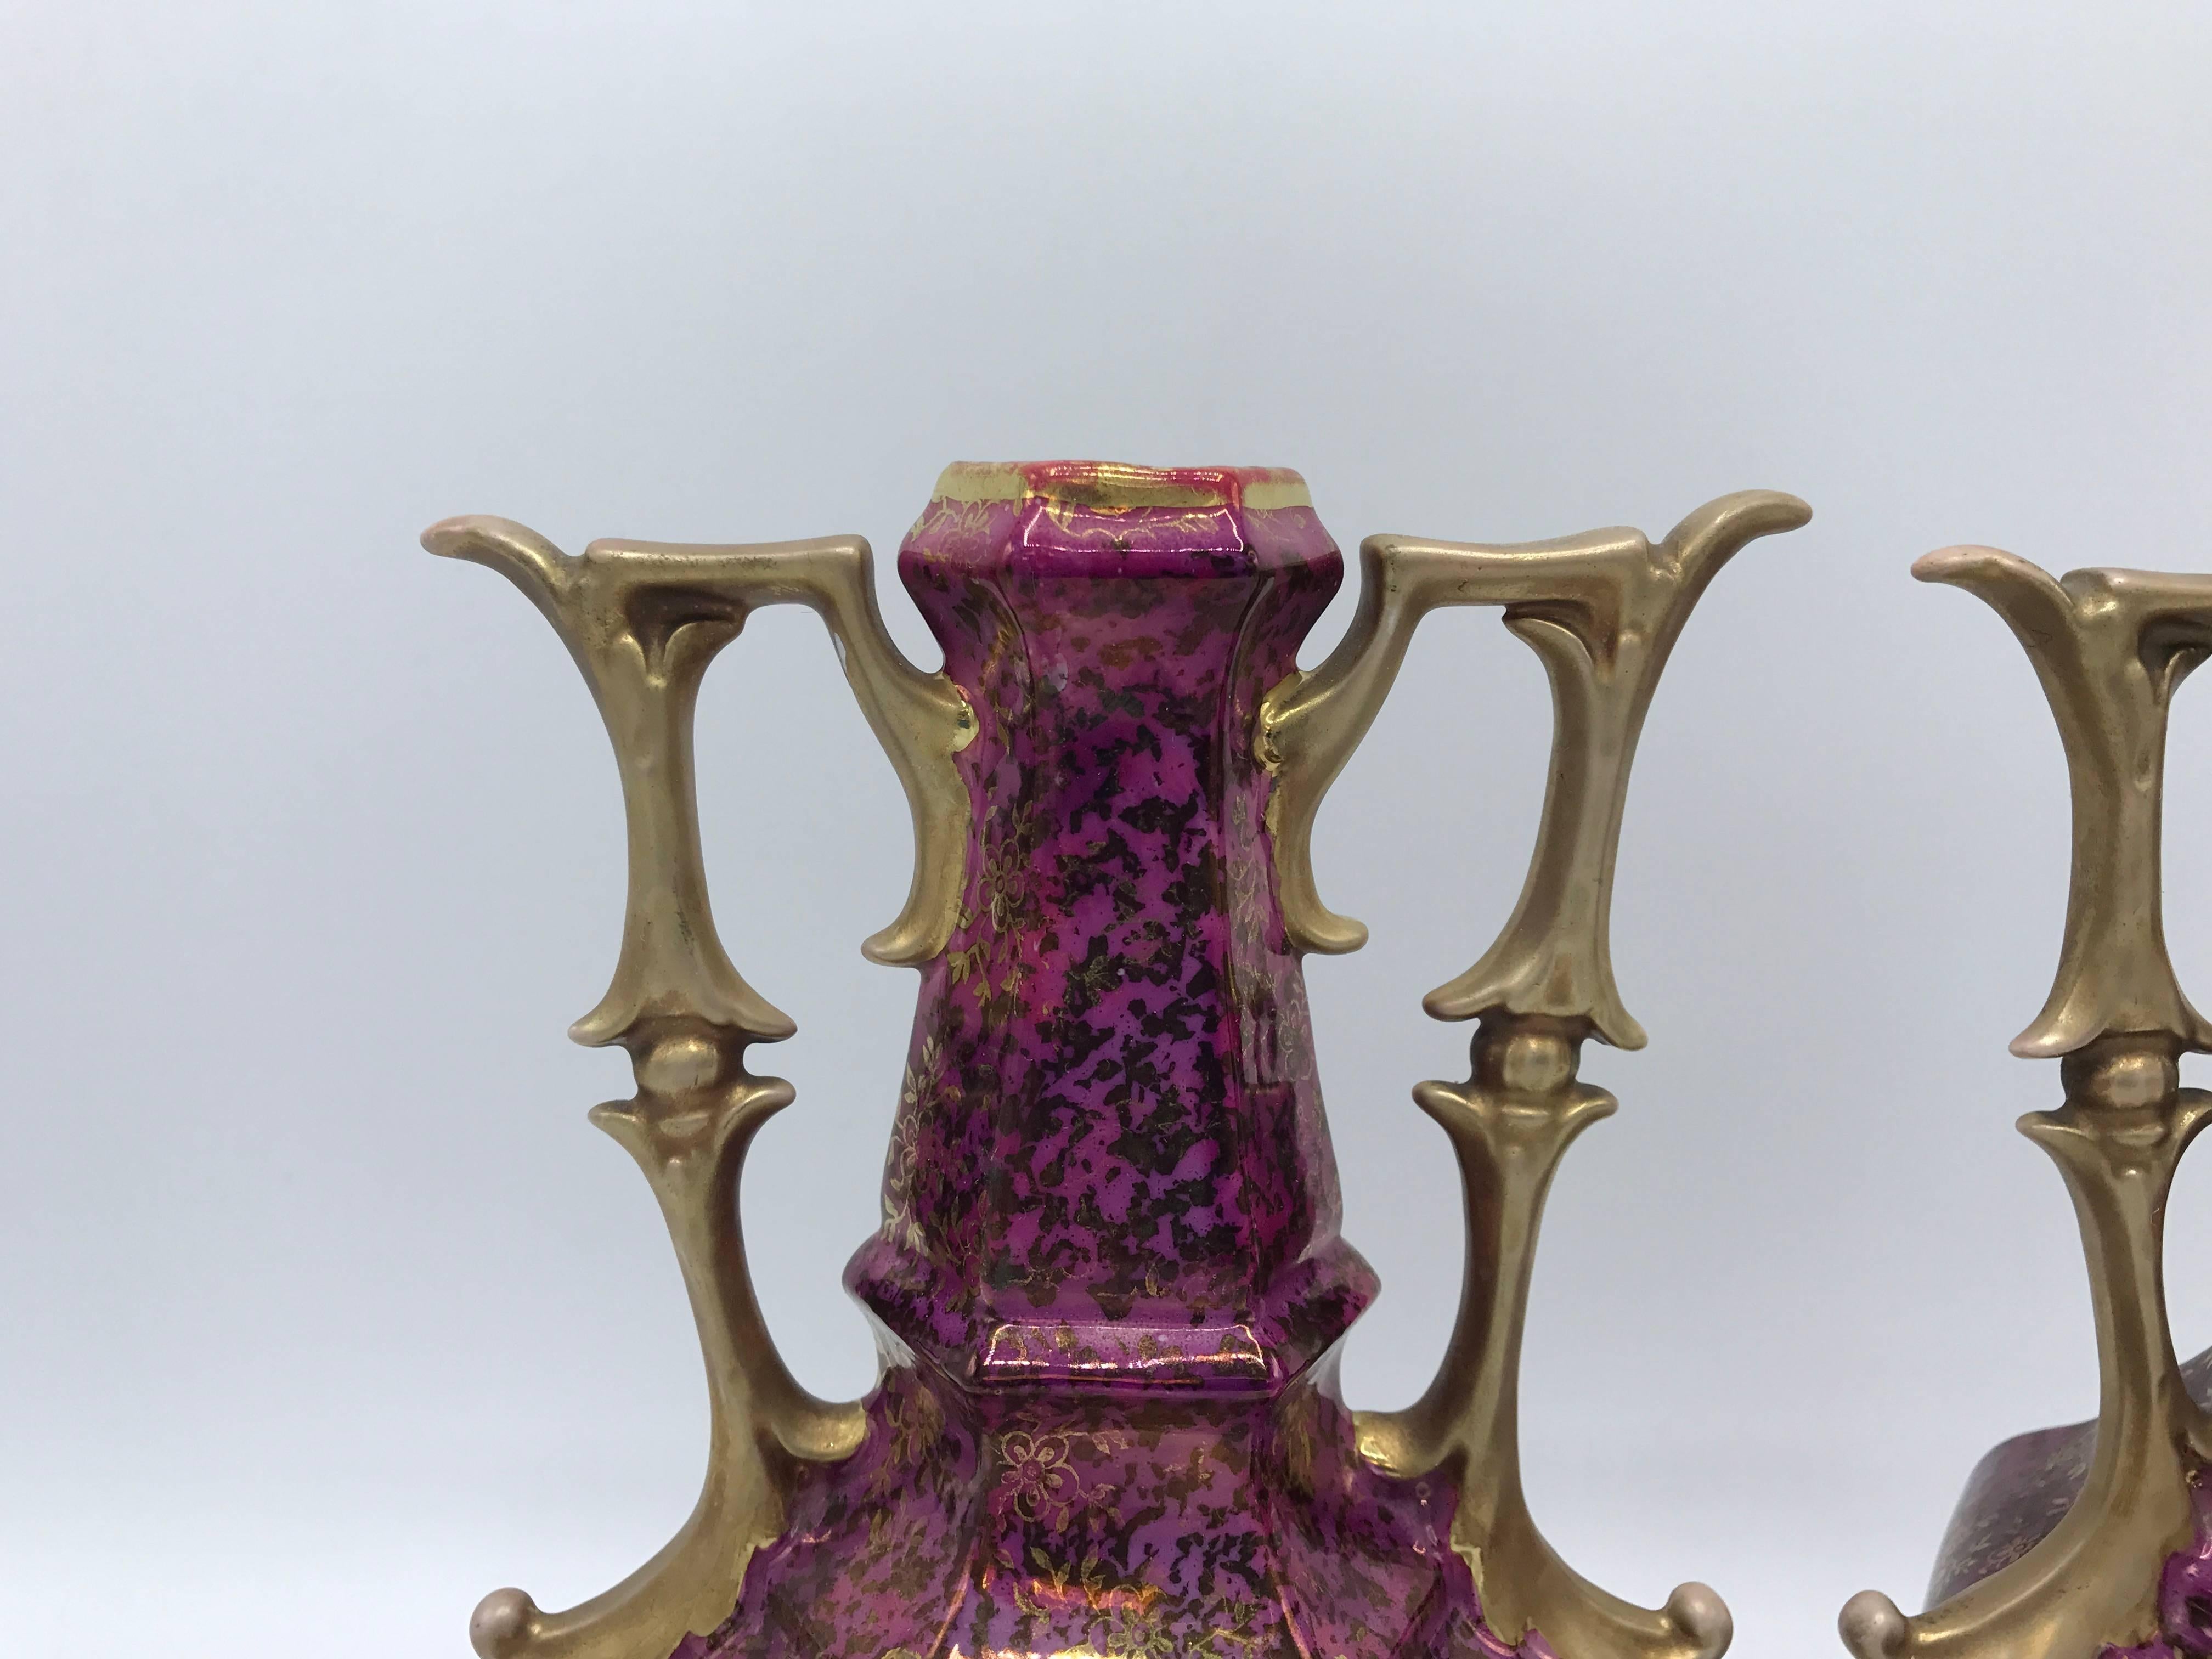 Offered is a gorgeous, pair of 19th century French hand-painted pink and gold vases with handles. Each vase has a different hand-painted scene on the front.